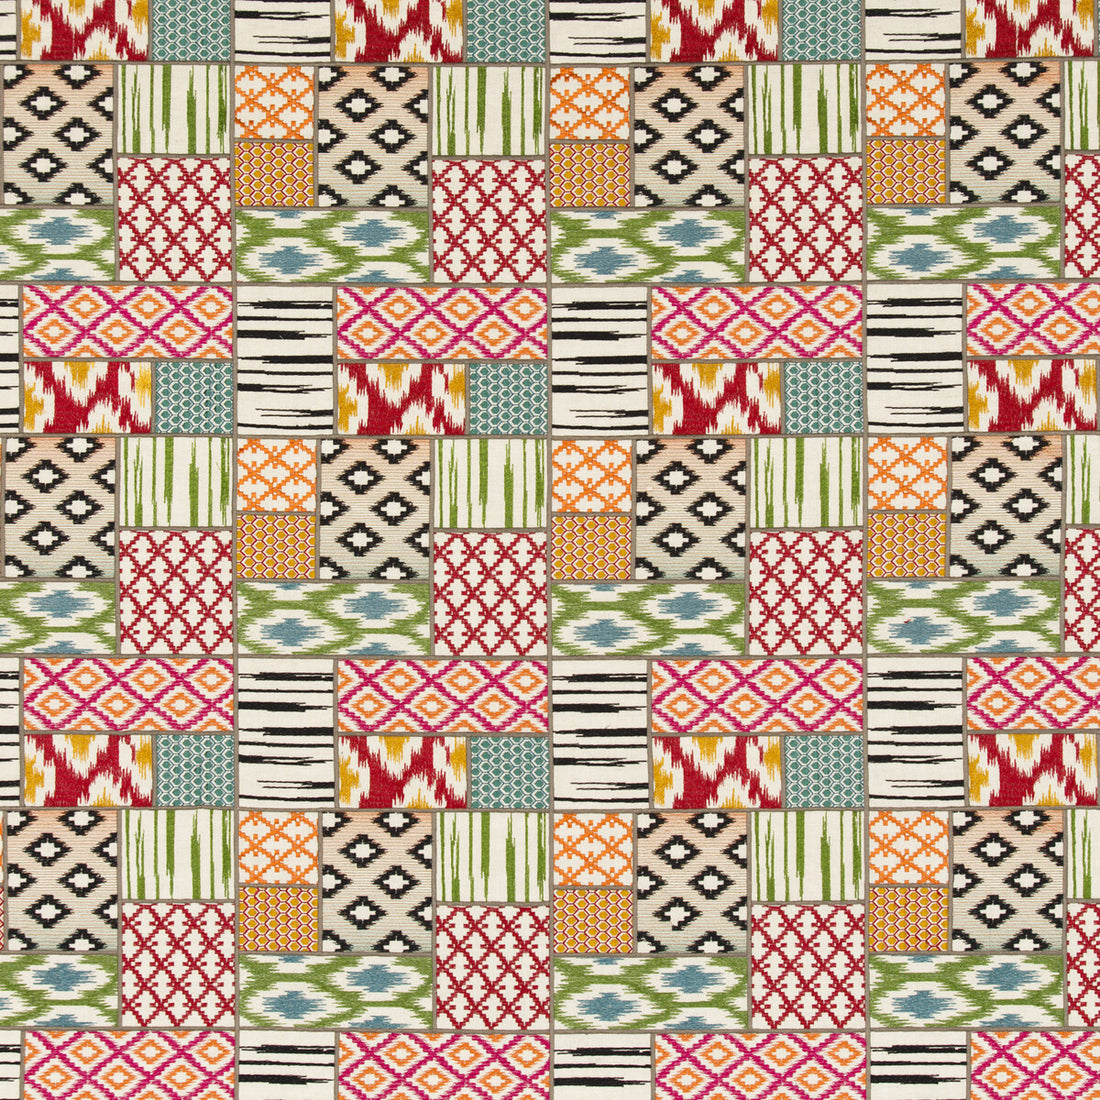 Muza fabric in spice color - pattern BF10716.1.0 - by G P &amp; J Baker in the East To West collection